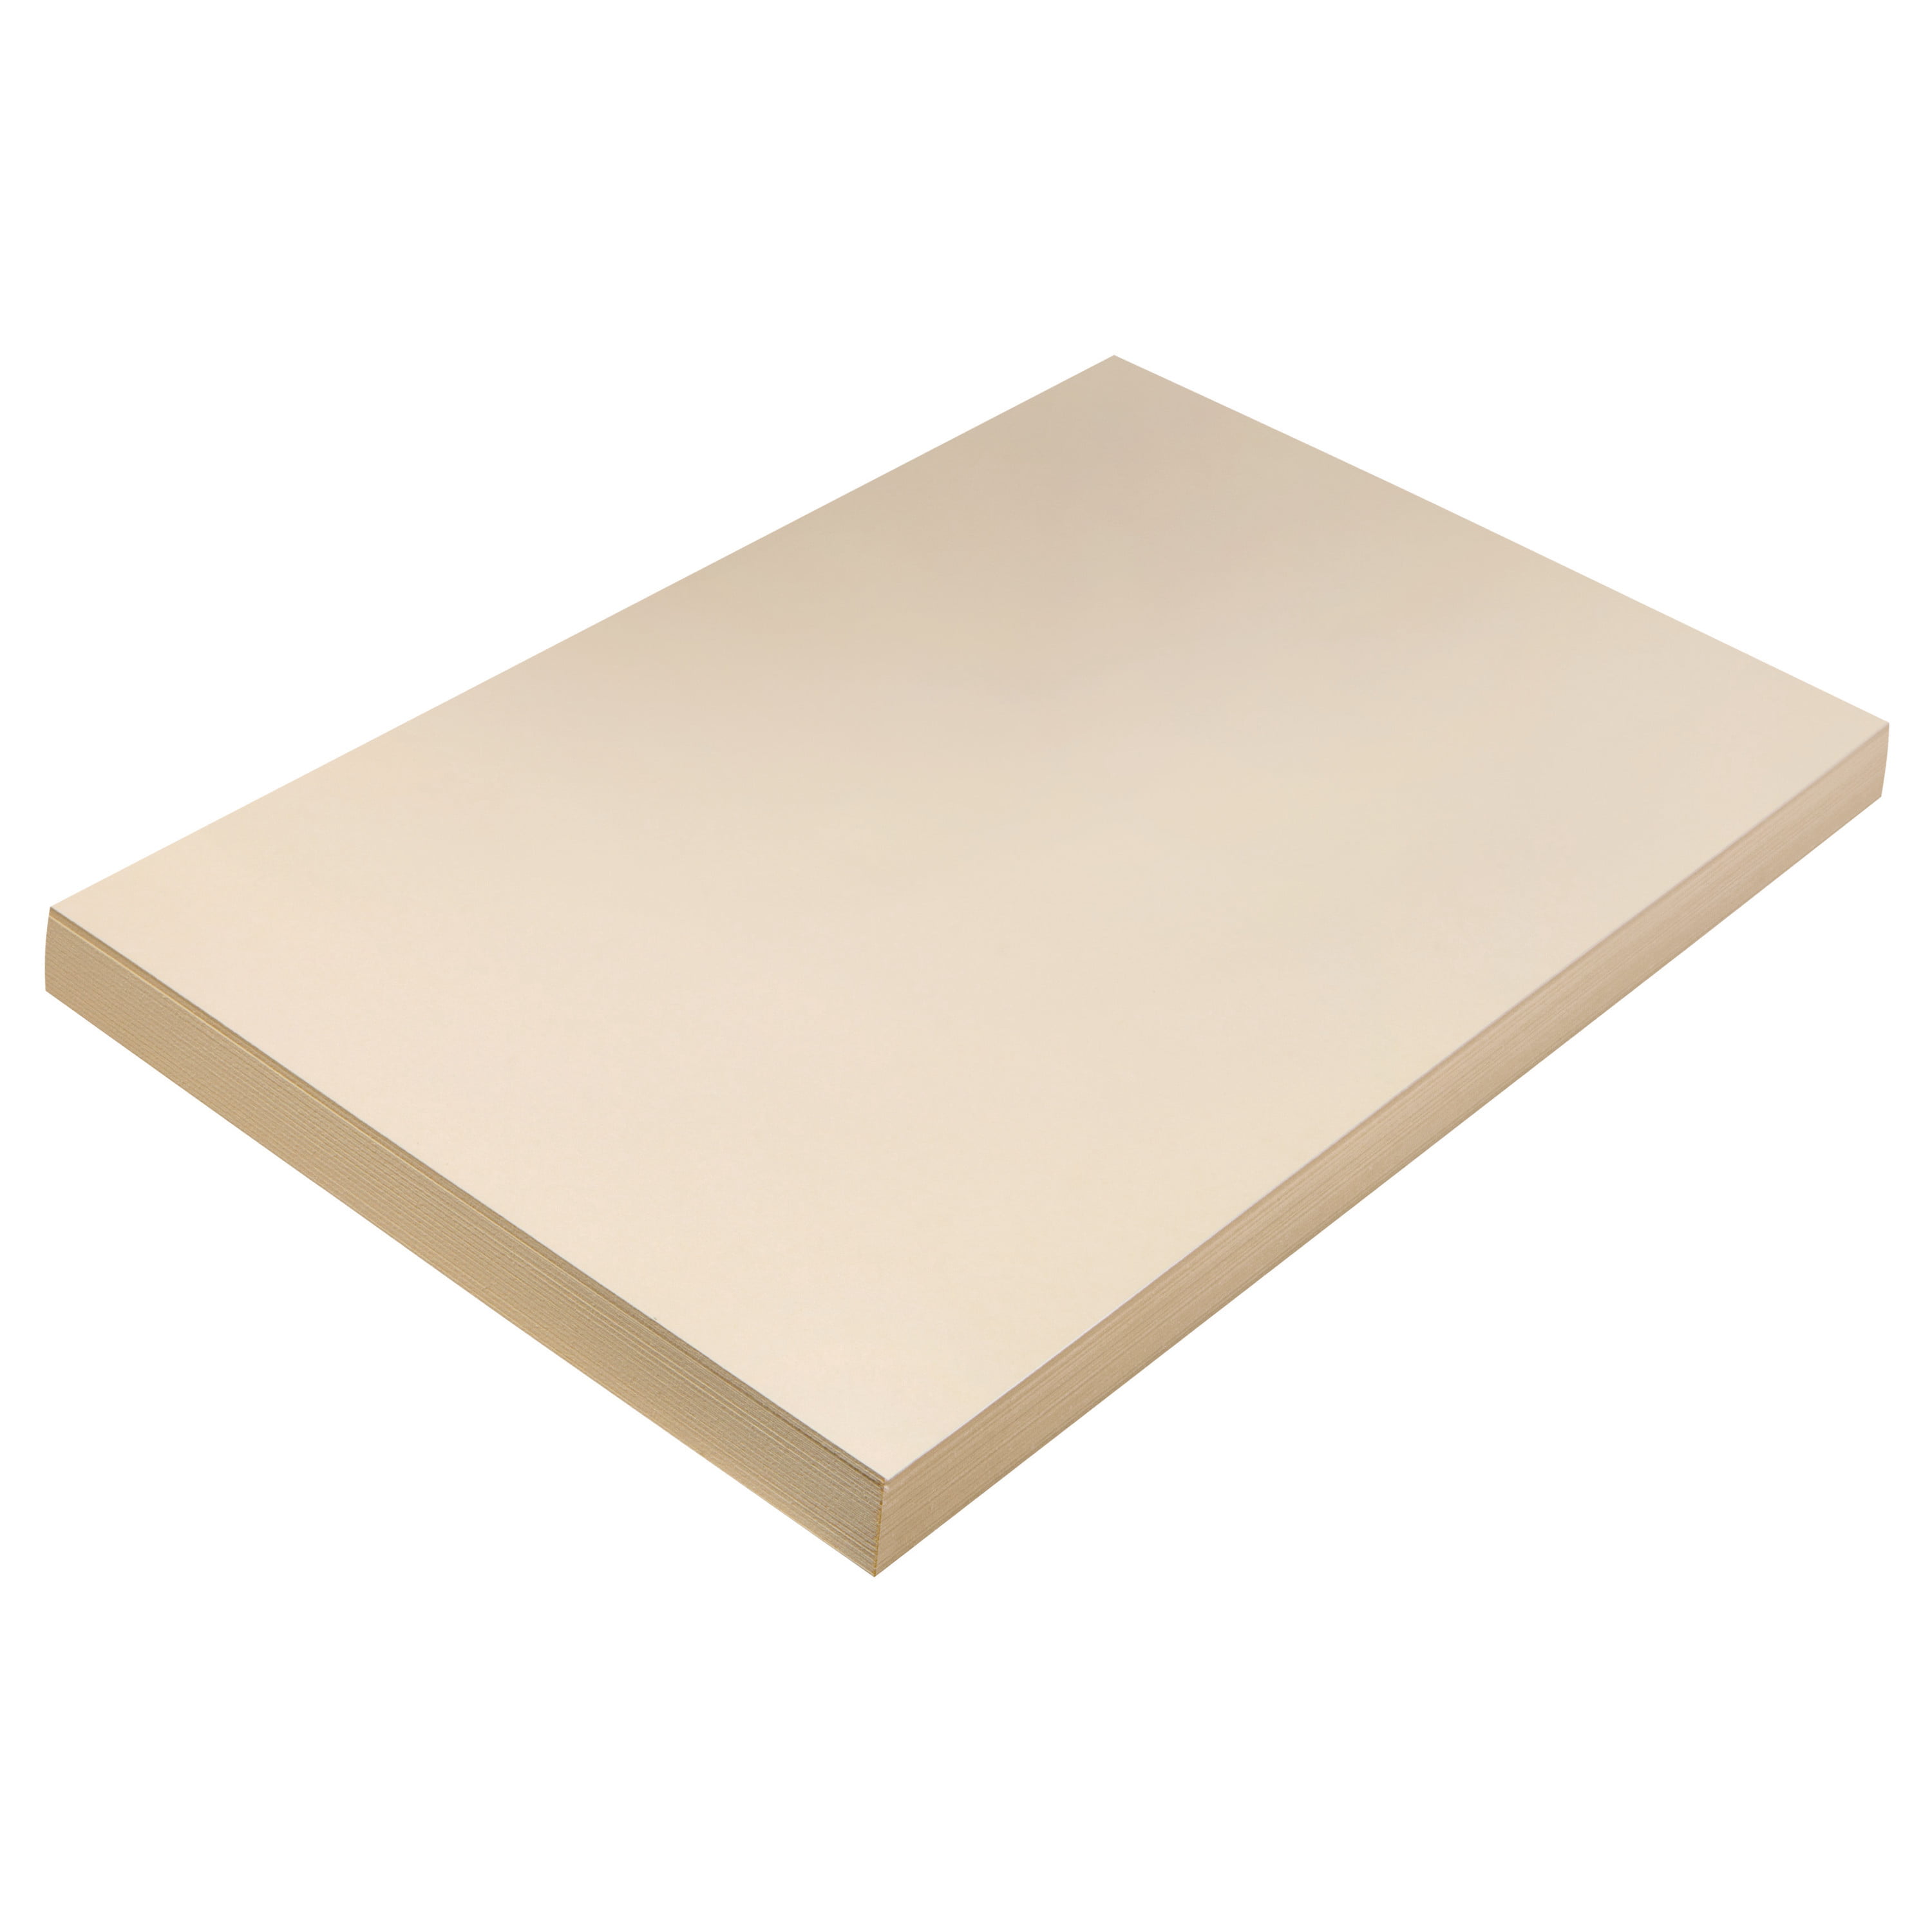 Heavyweight Pacon PAC5214 Tagboard Pack of 2 White 100 Sheets 12 x 18 